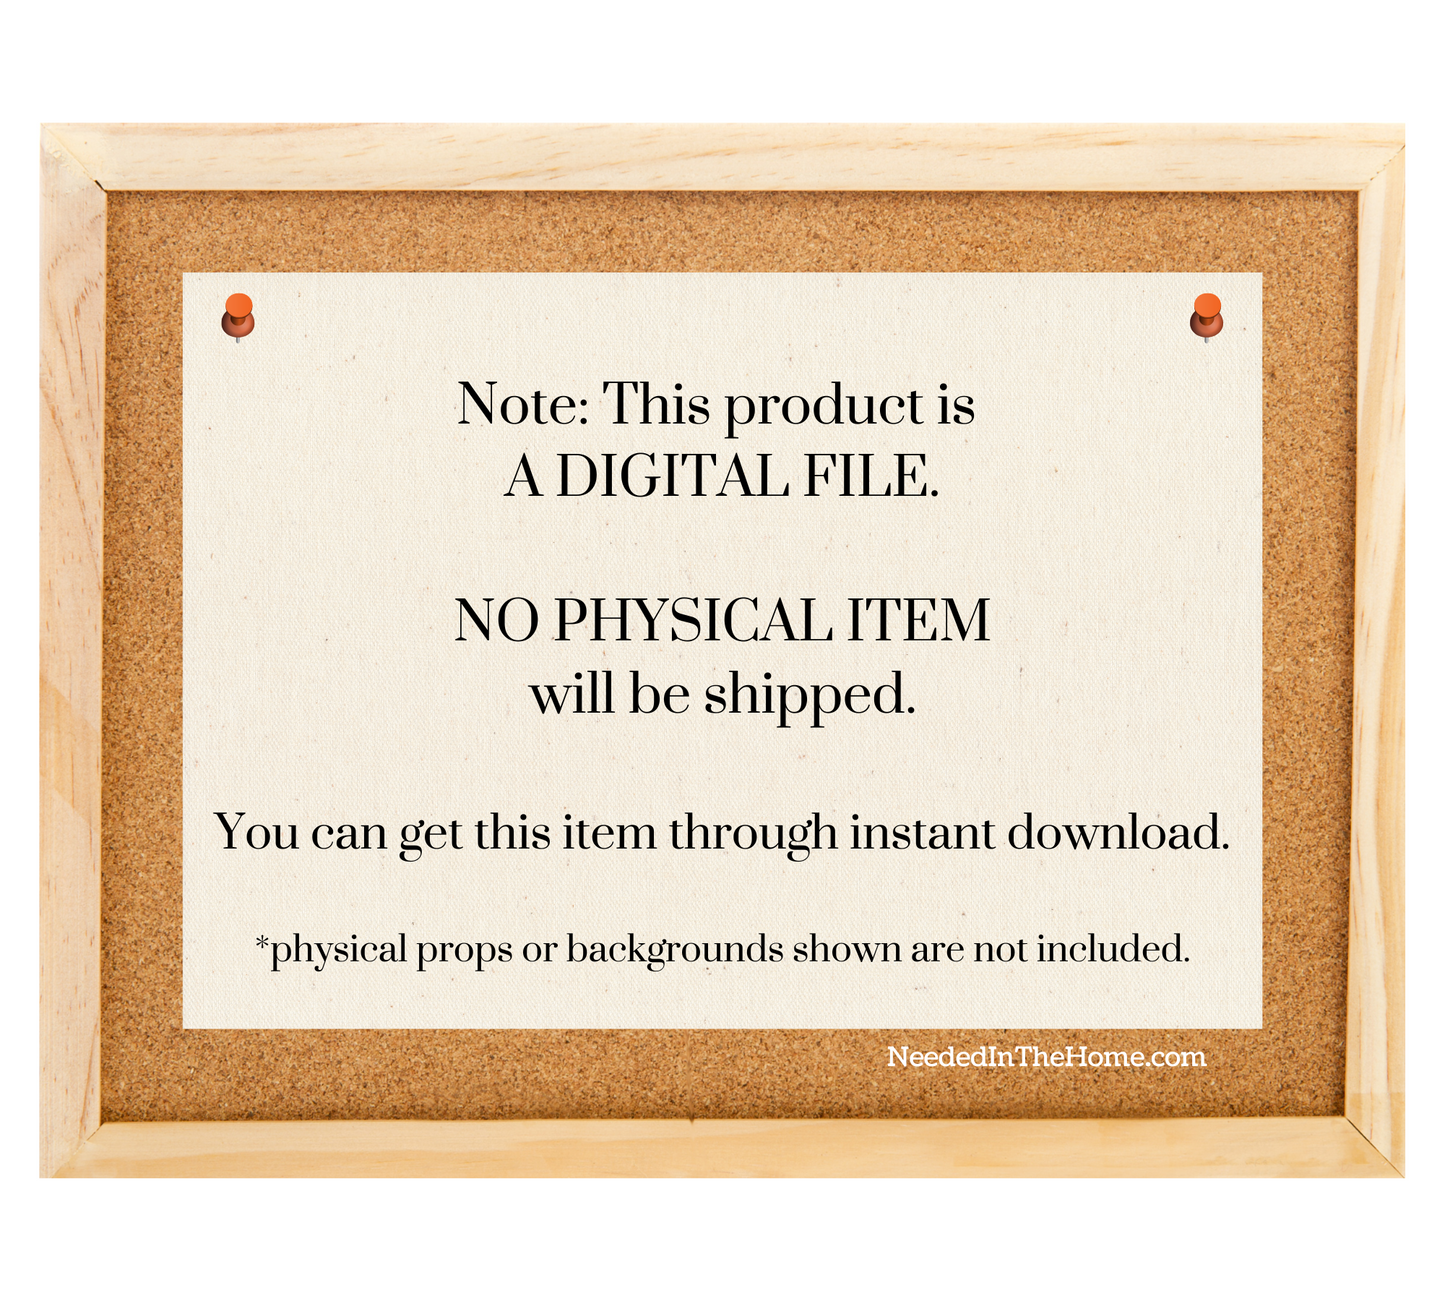 bulletin board with a note pinned up that says note this product is a digital file no physical item will be shipped you can get this item through instant download physical props or backgrounds shown are not included neededinthehome.com